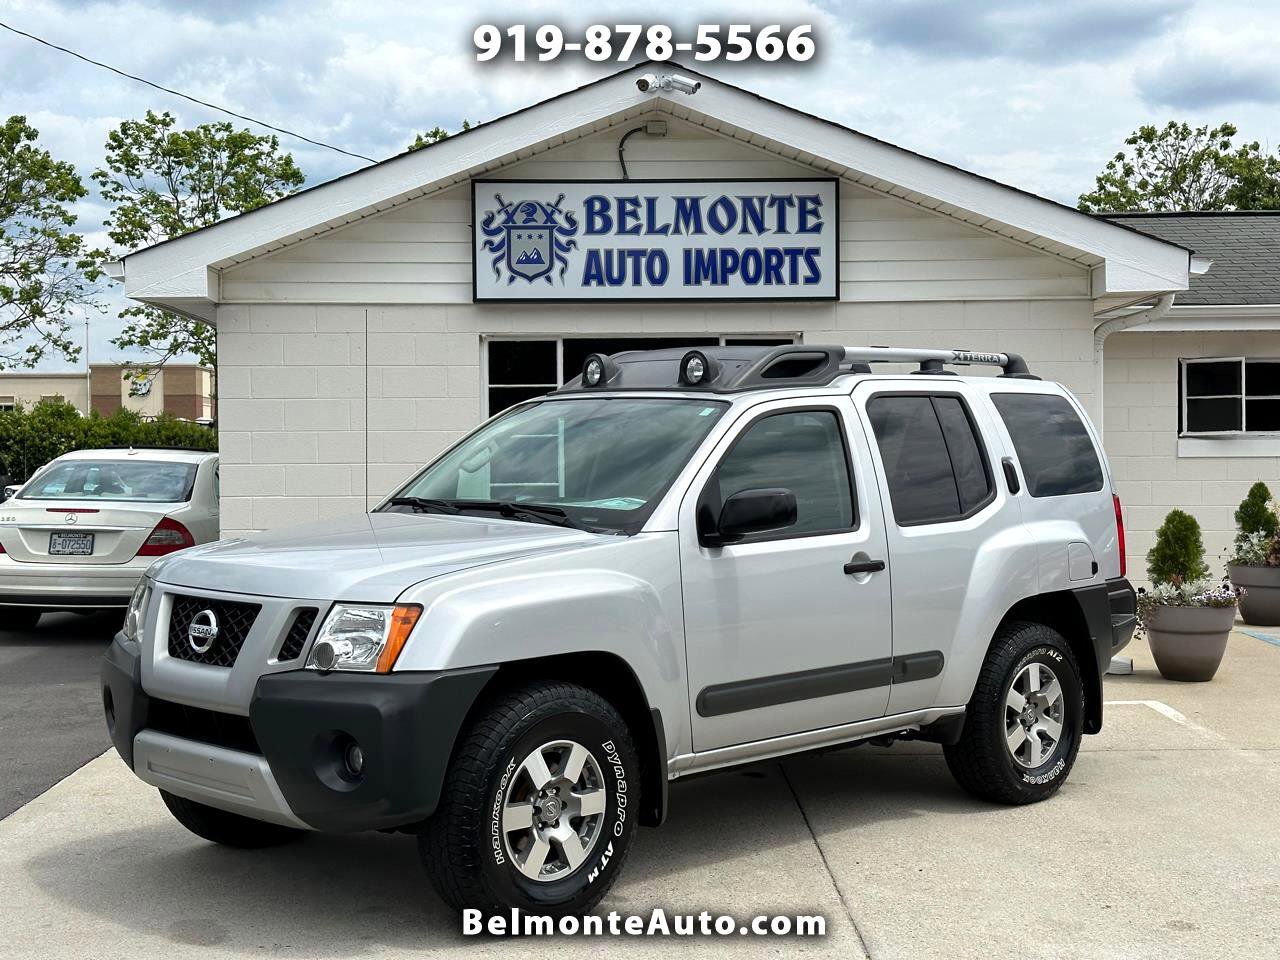 Used Nissan Xterra for Sale Near Me in Wilson, NC - Autotrader